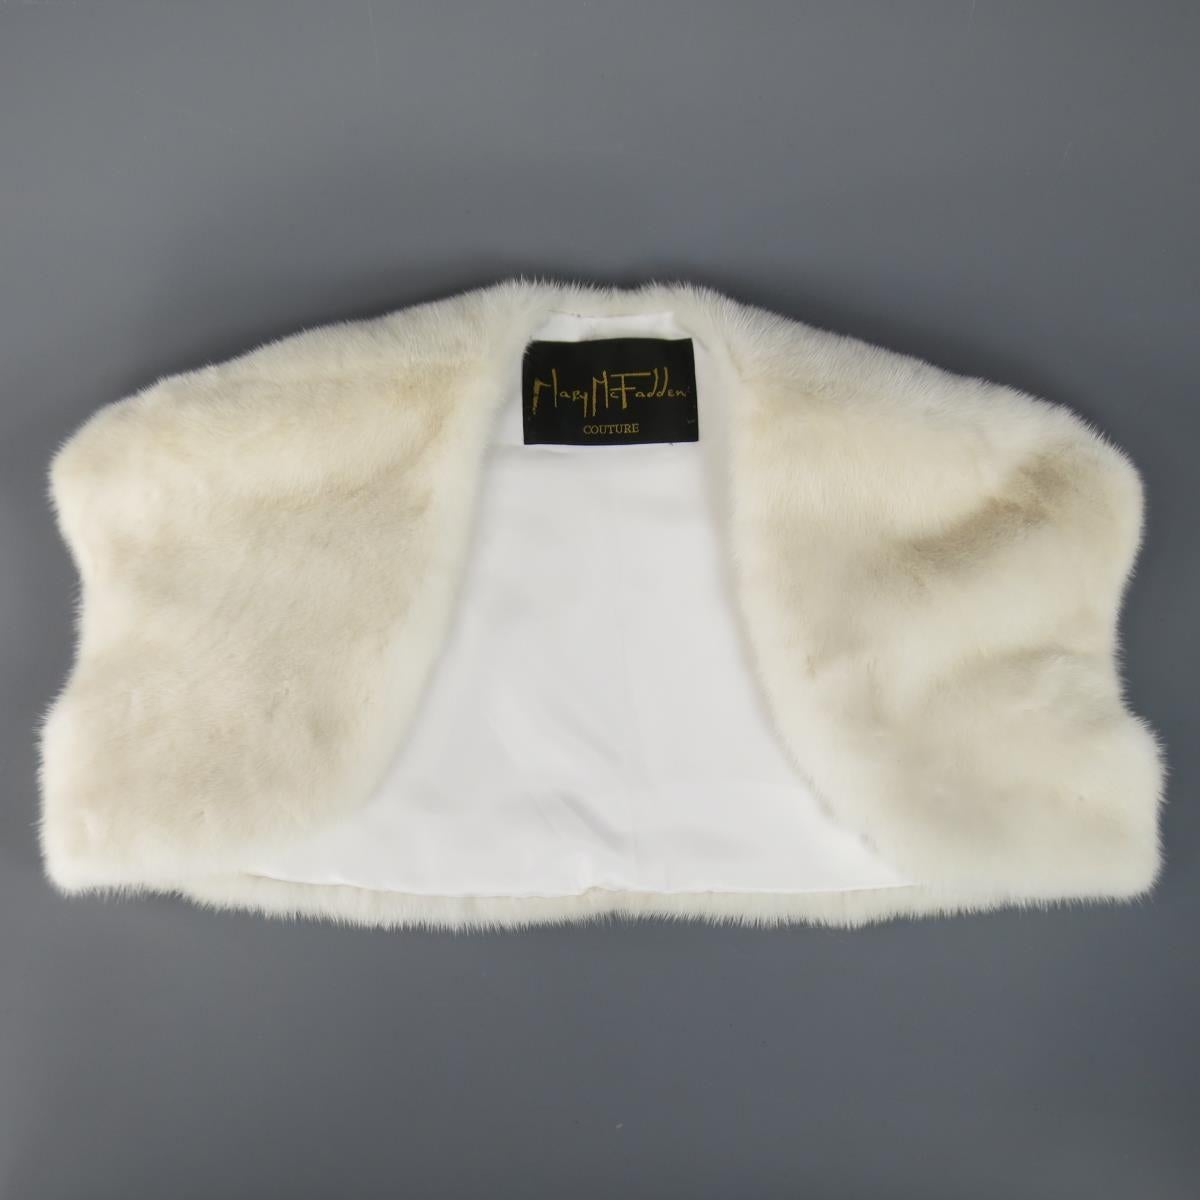 Chic MARY MCFADDEN cropped bolero shrug in off white cream mink fur with satin lining. Made in USA.
 
Excellent Pre-Owned Condition.
 
Measurements:
 
Shoulder: 19 in.
Bust: 36 in.
Length: 11 in.